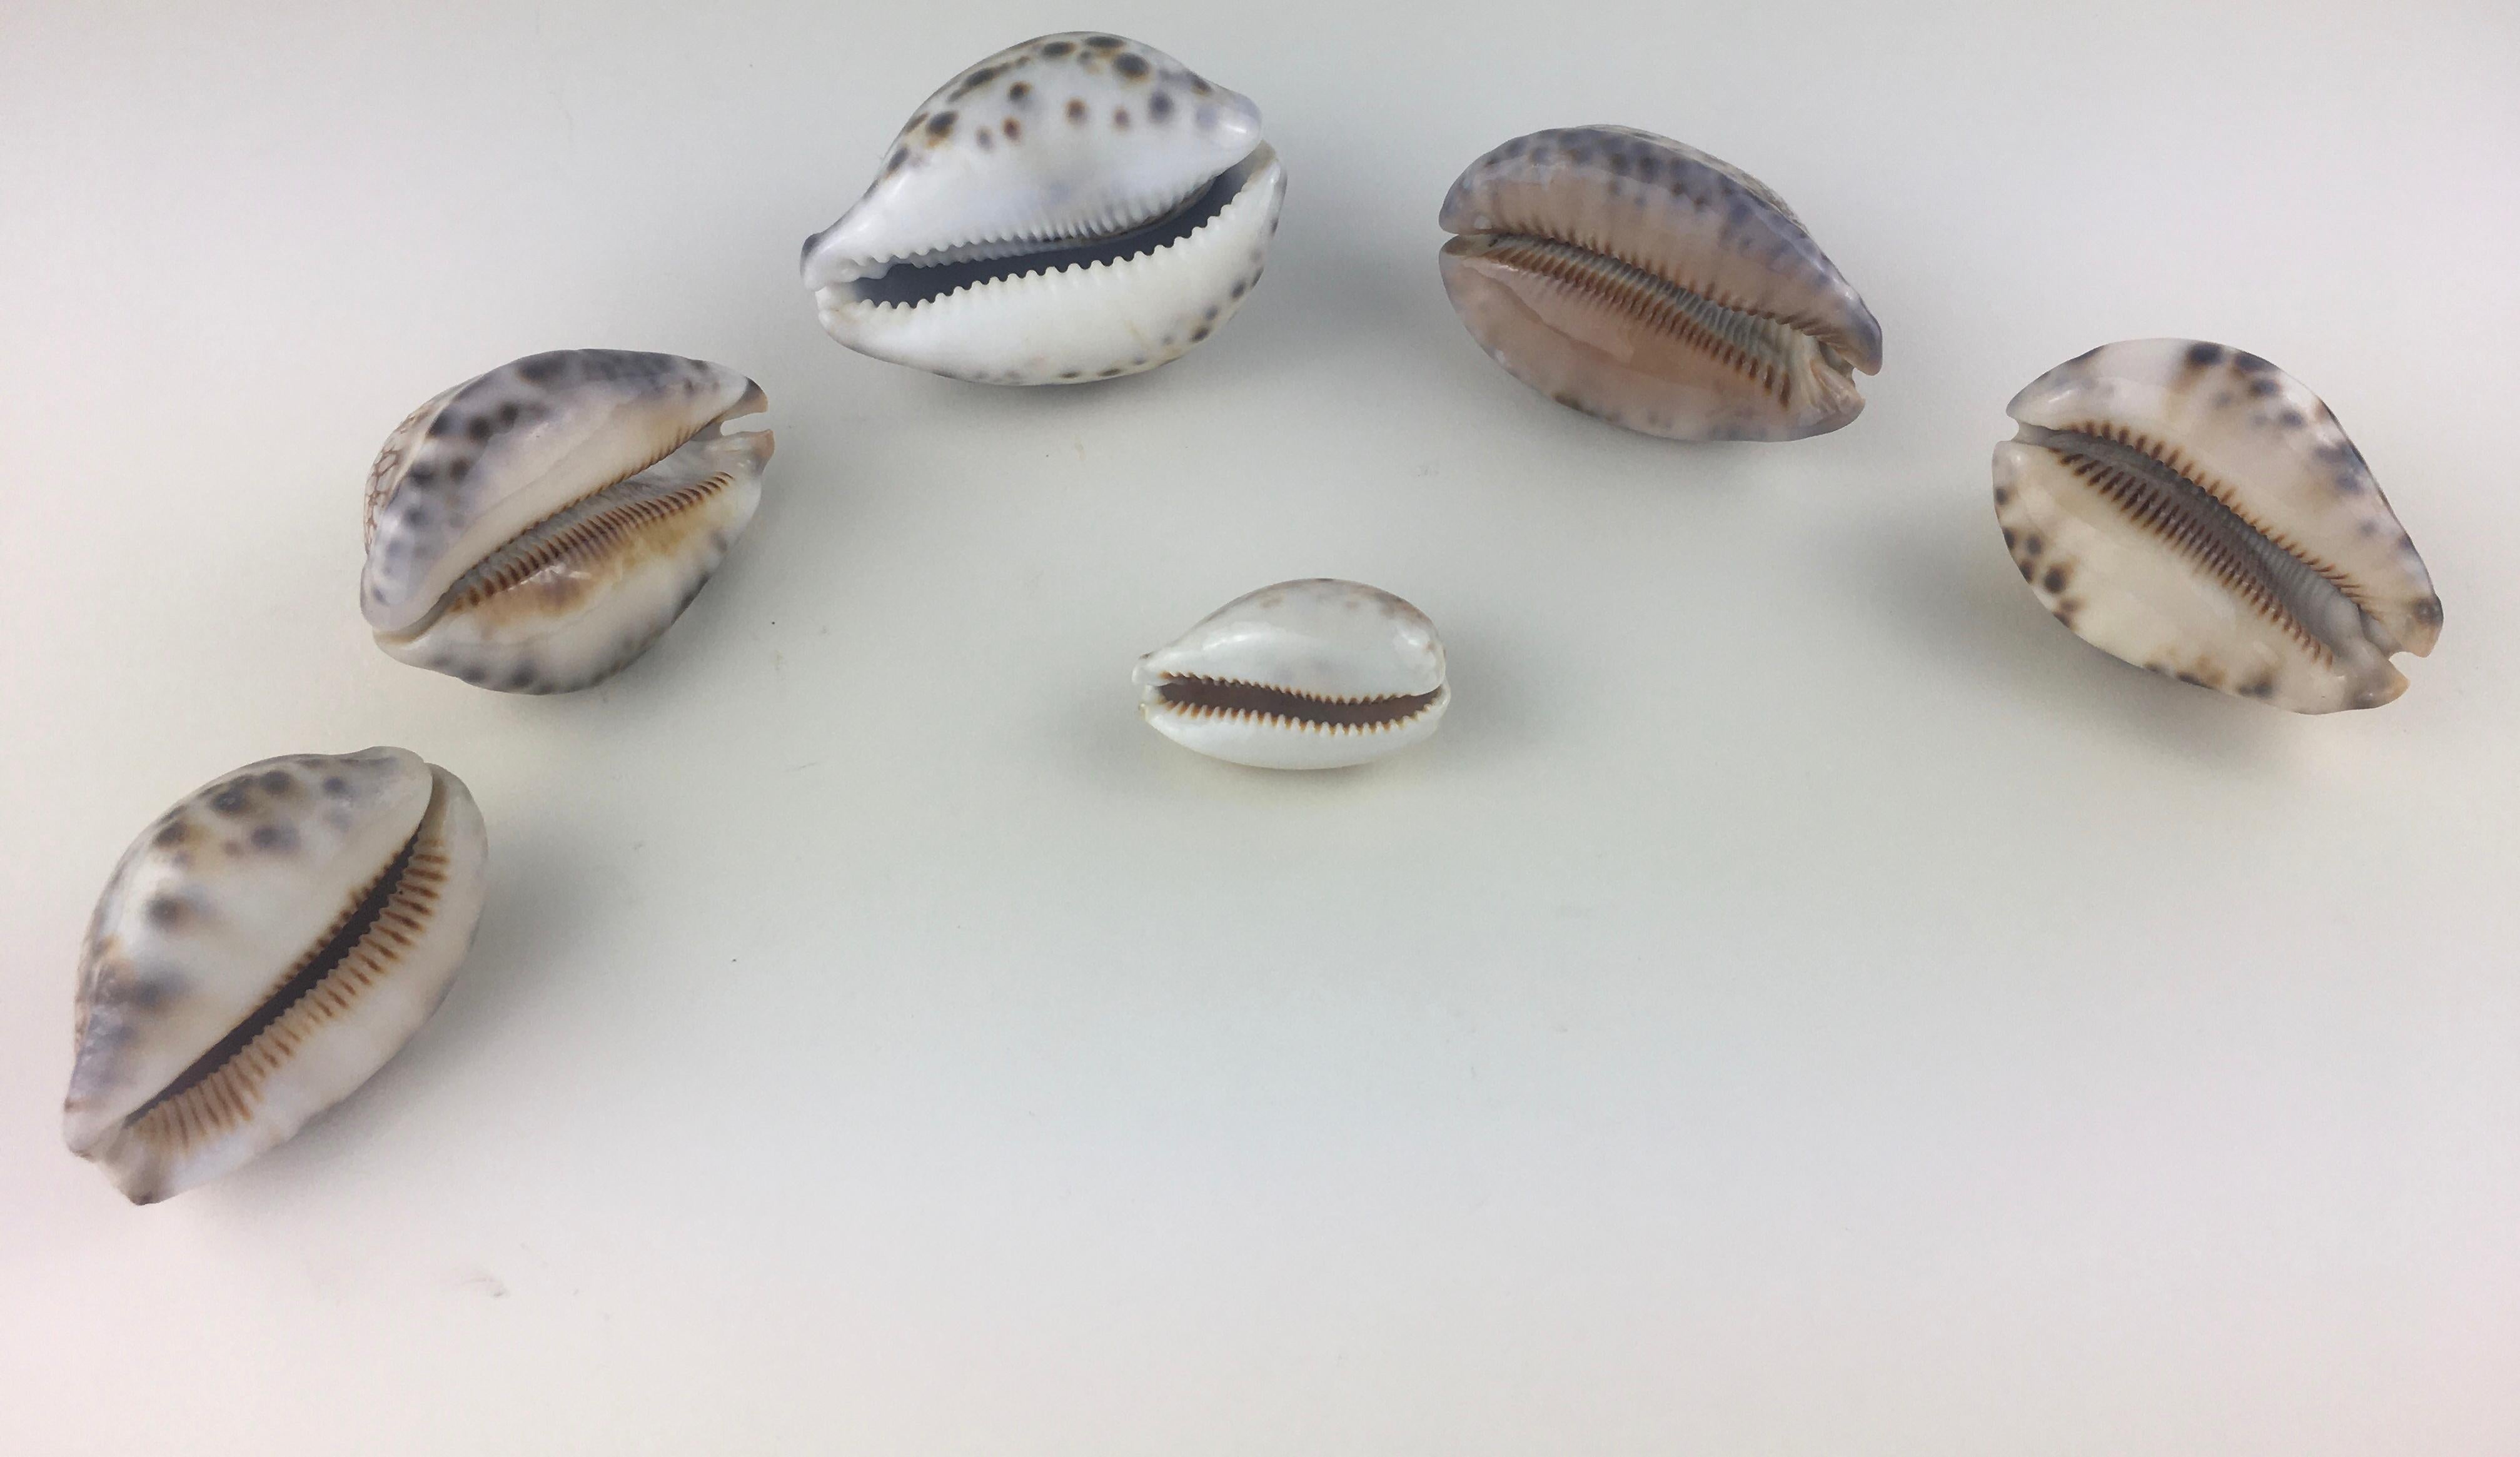 A stunning collection of six natural sea specimens including Trivia Europaea, Cypraea Tigris, and Cyprae Lynx. 

These shells are very rare, vivid beauties, stunning shells with incredible color, a smooth glossy dorsum, a whitish base and all with a